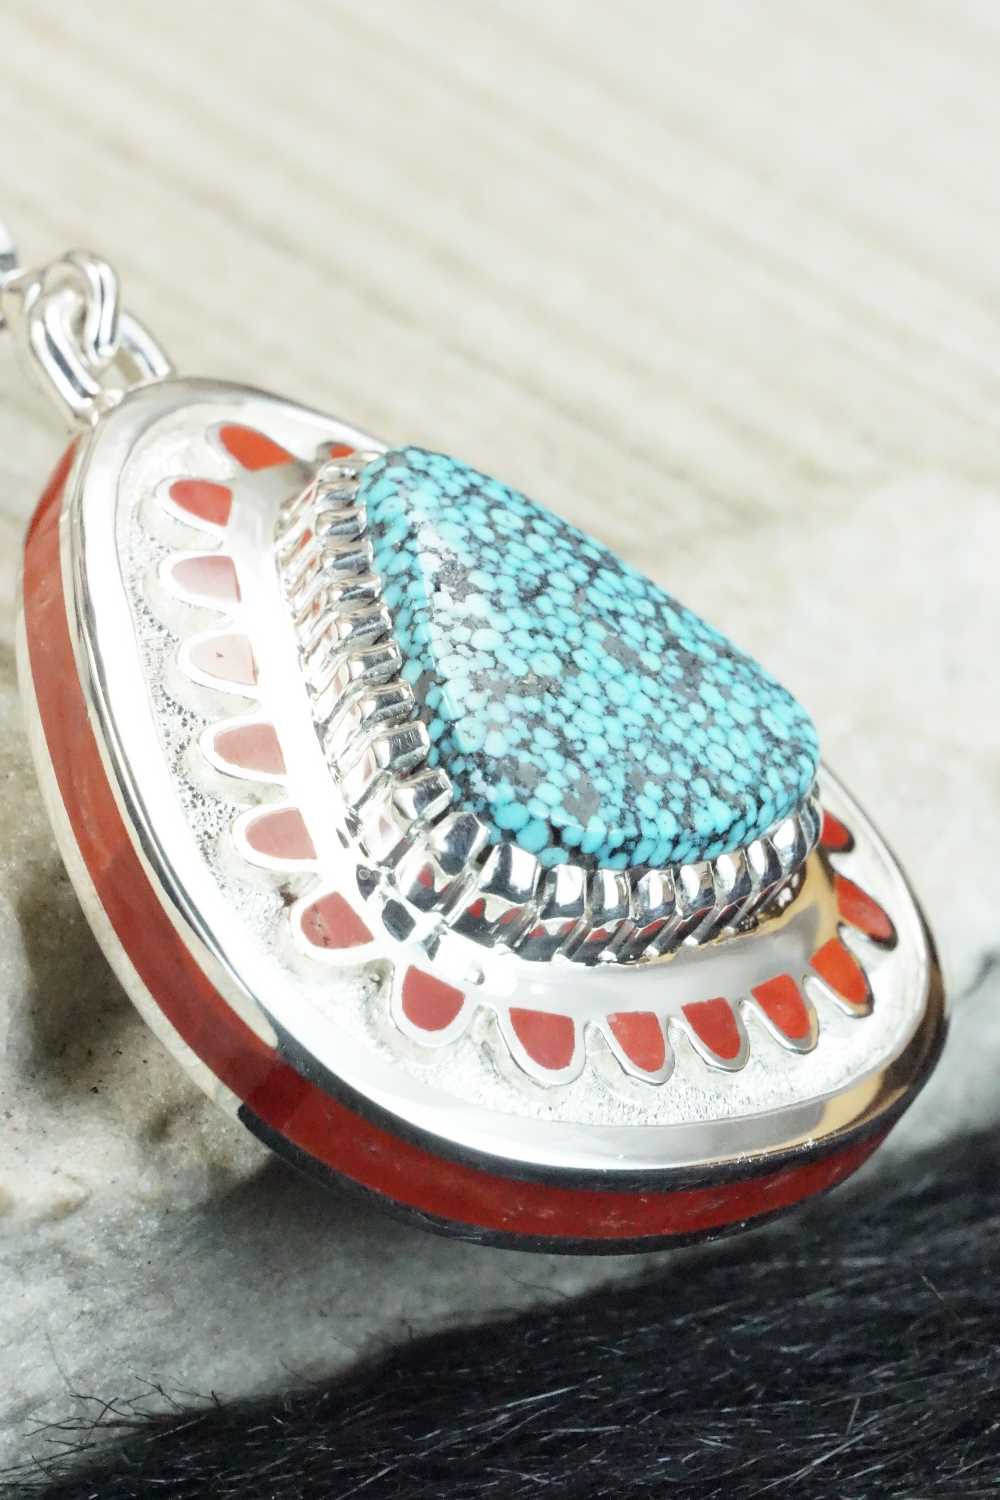 Turquoise, Coral & Sterling Silver Pendant - Vernon Haskie